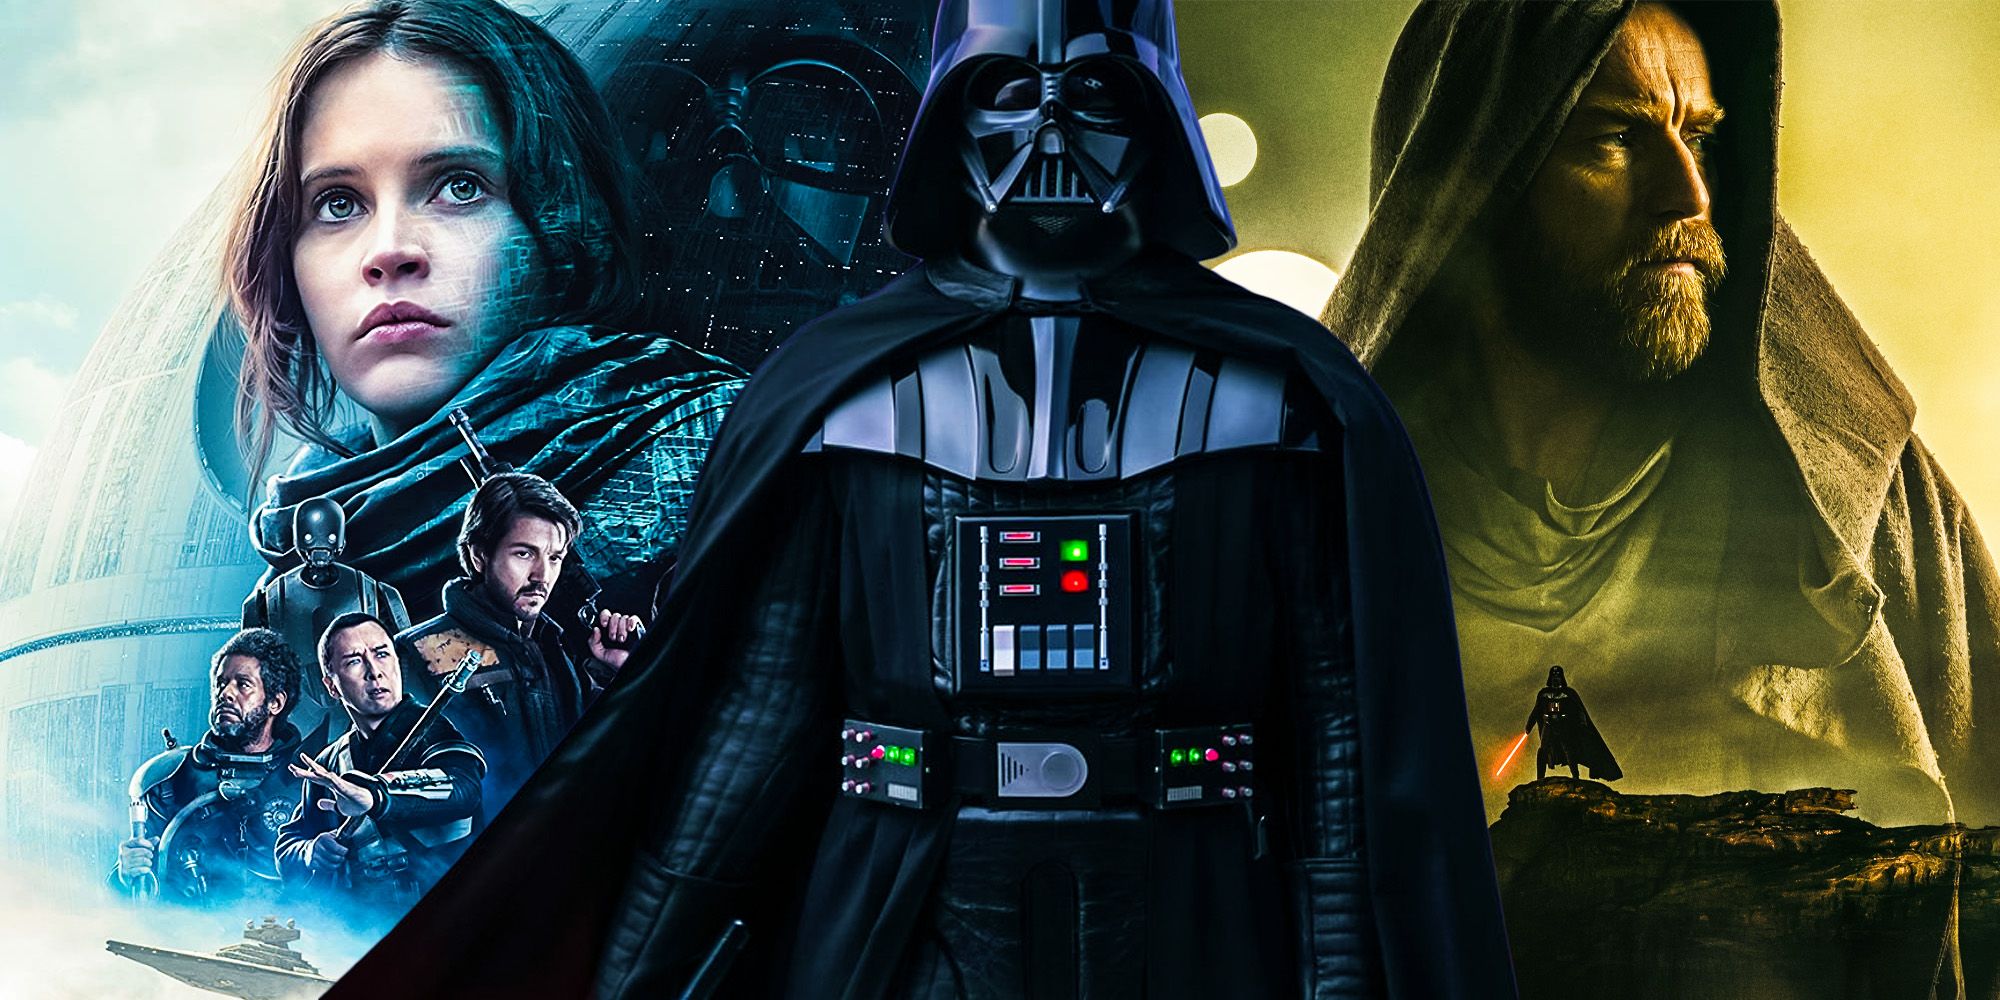 why Darth Vader sounds more original trilogy in kenobi than rogue one